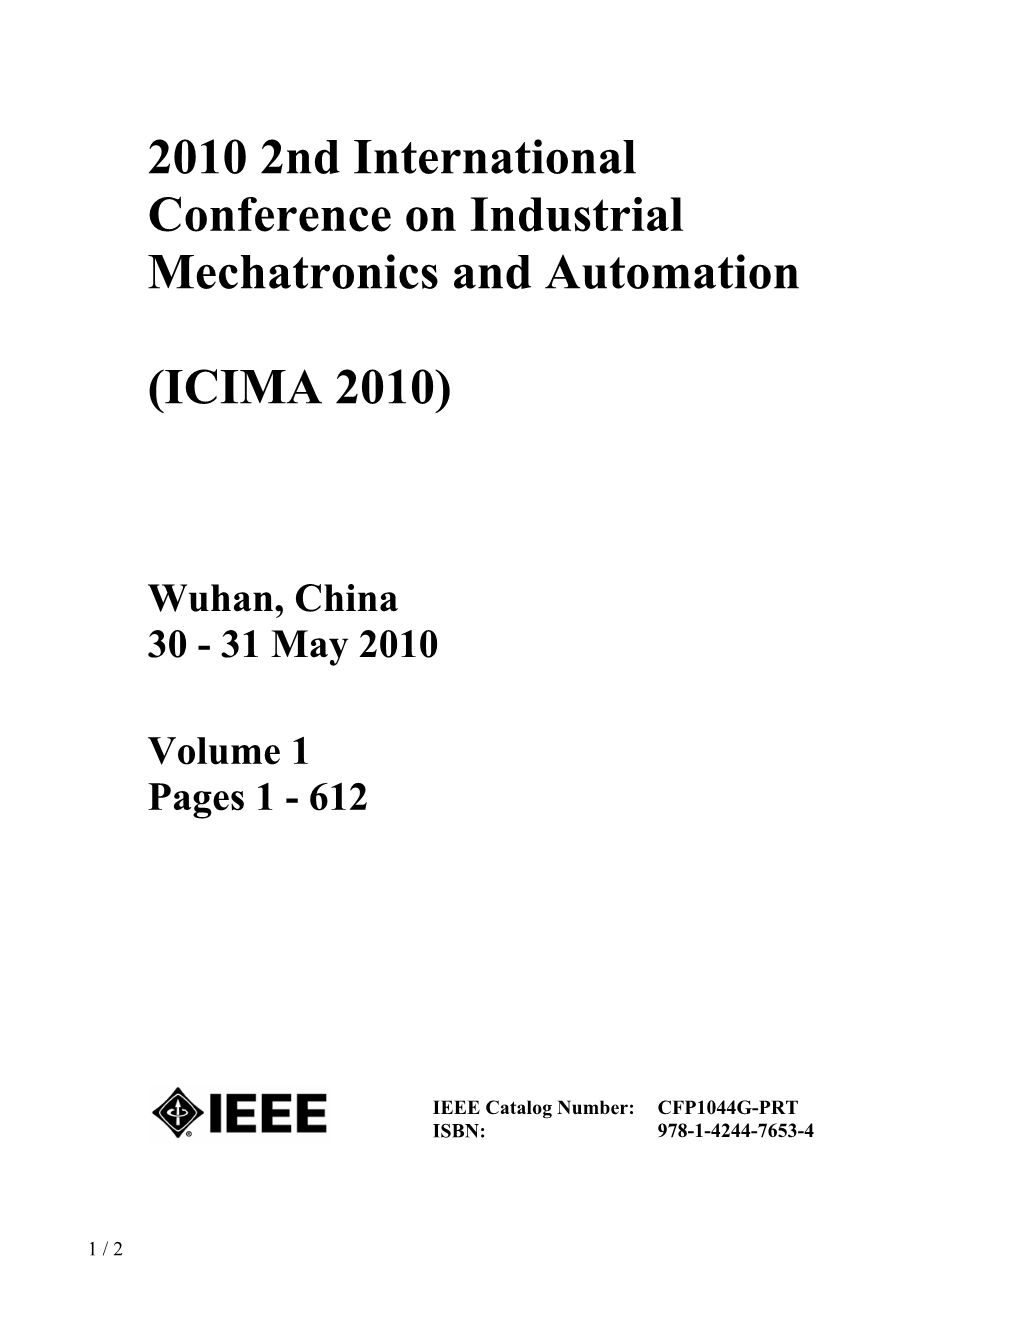 2010 2Nd International Conference on Industrial Mechatronics and Automation